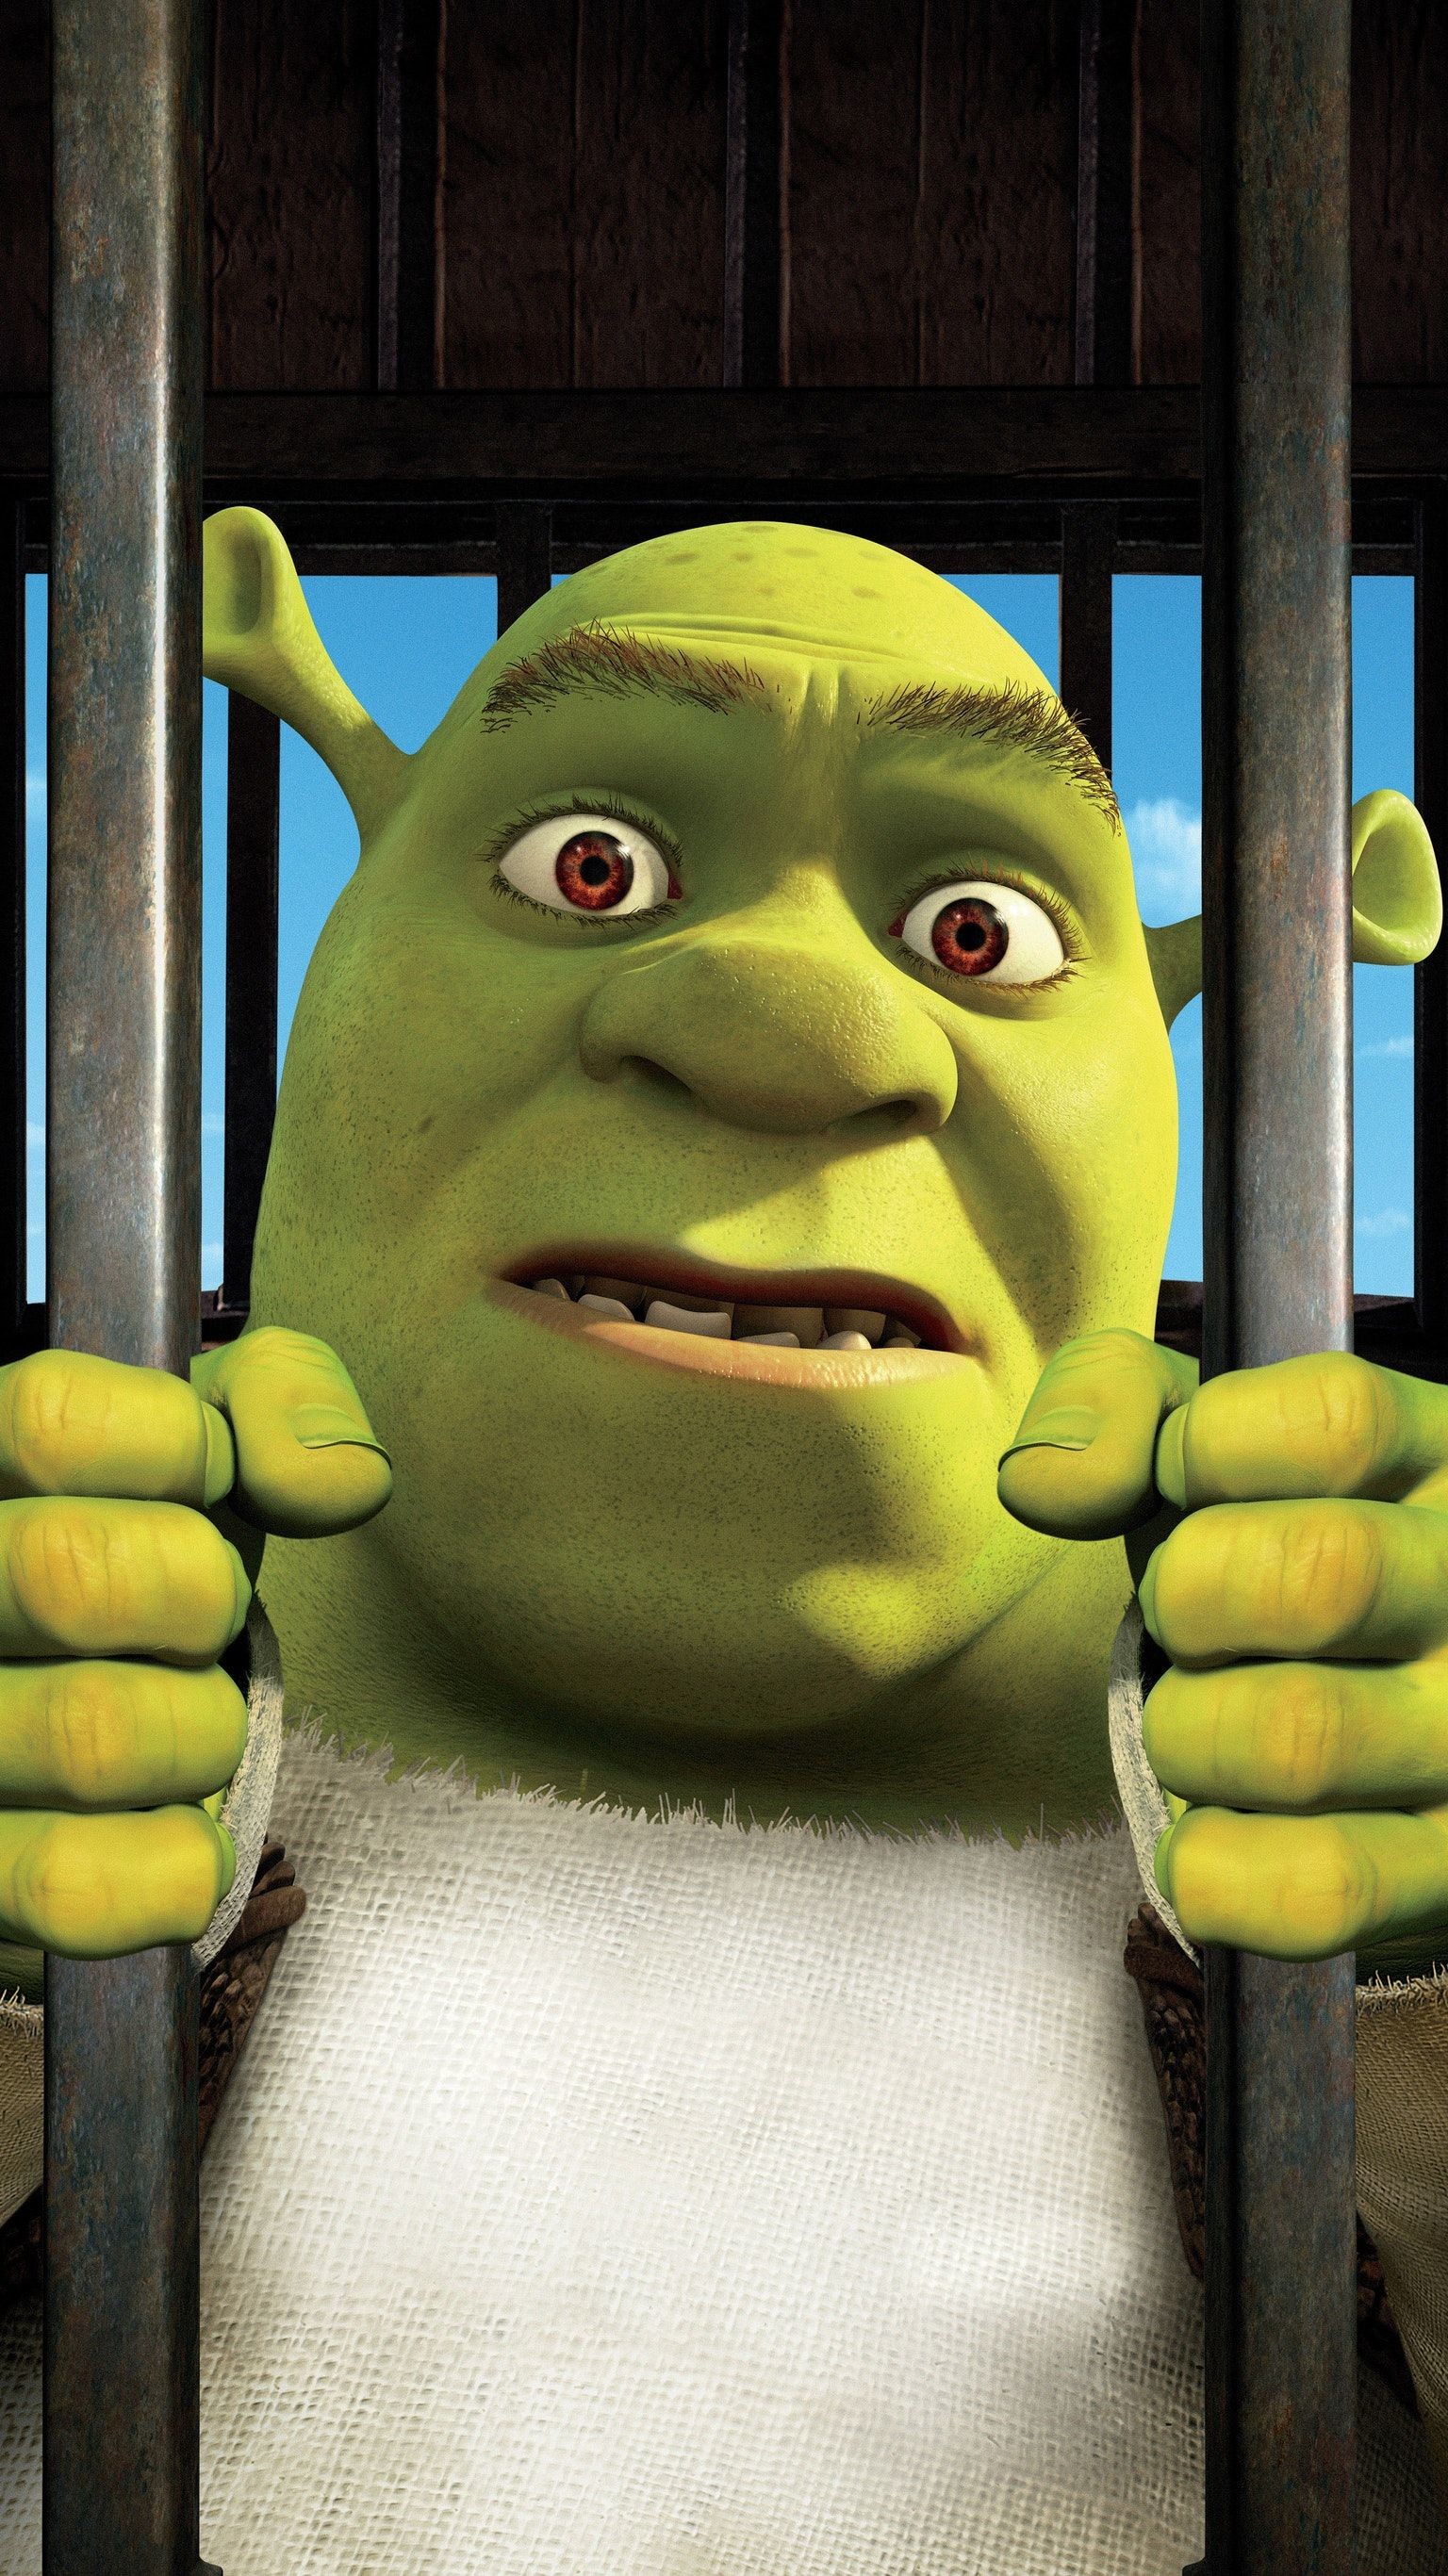 shrek wallpaper iphone,animation,animated cartoon,fictional character,toy,smile